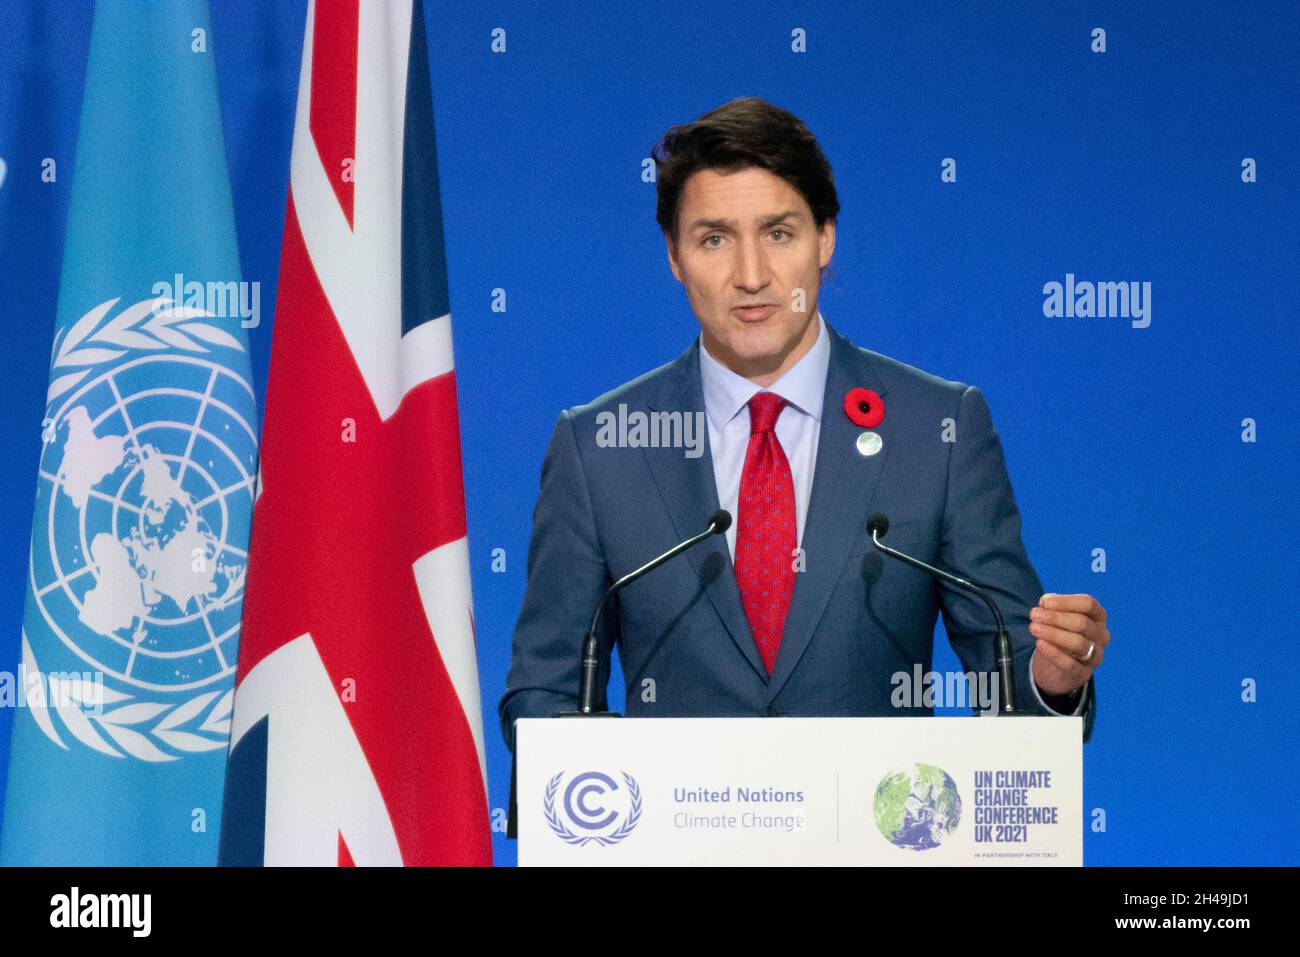 Glasgow, Scotland, UK. 1st November 2021.  Justin Trudeau Prime Minister of Canada gives speech to gives speech to the COP26 UN climate change conference in Glasgow.  Iain Masterton/Alamy Live News. Stock Photo